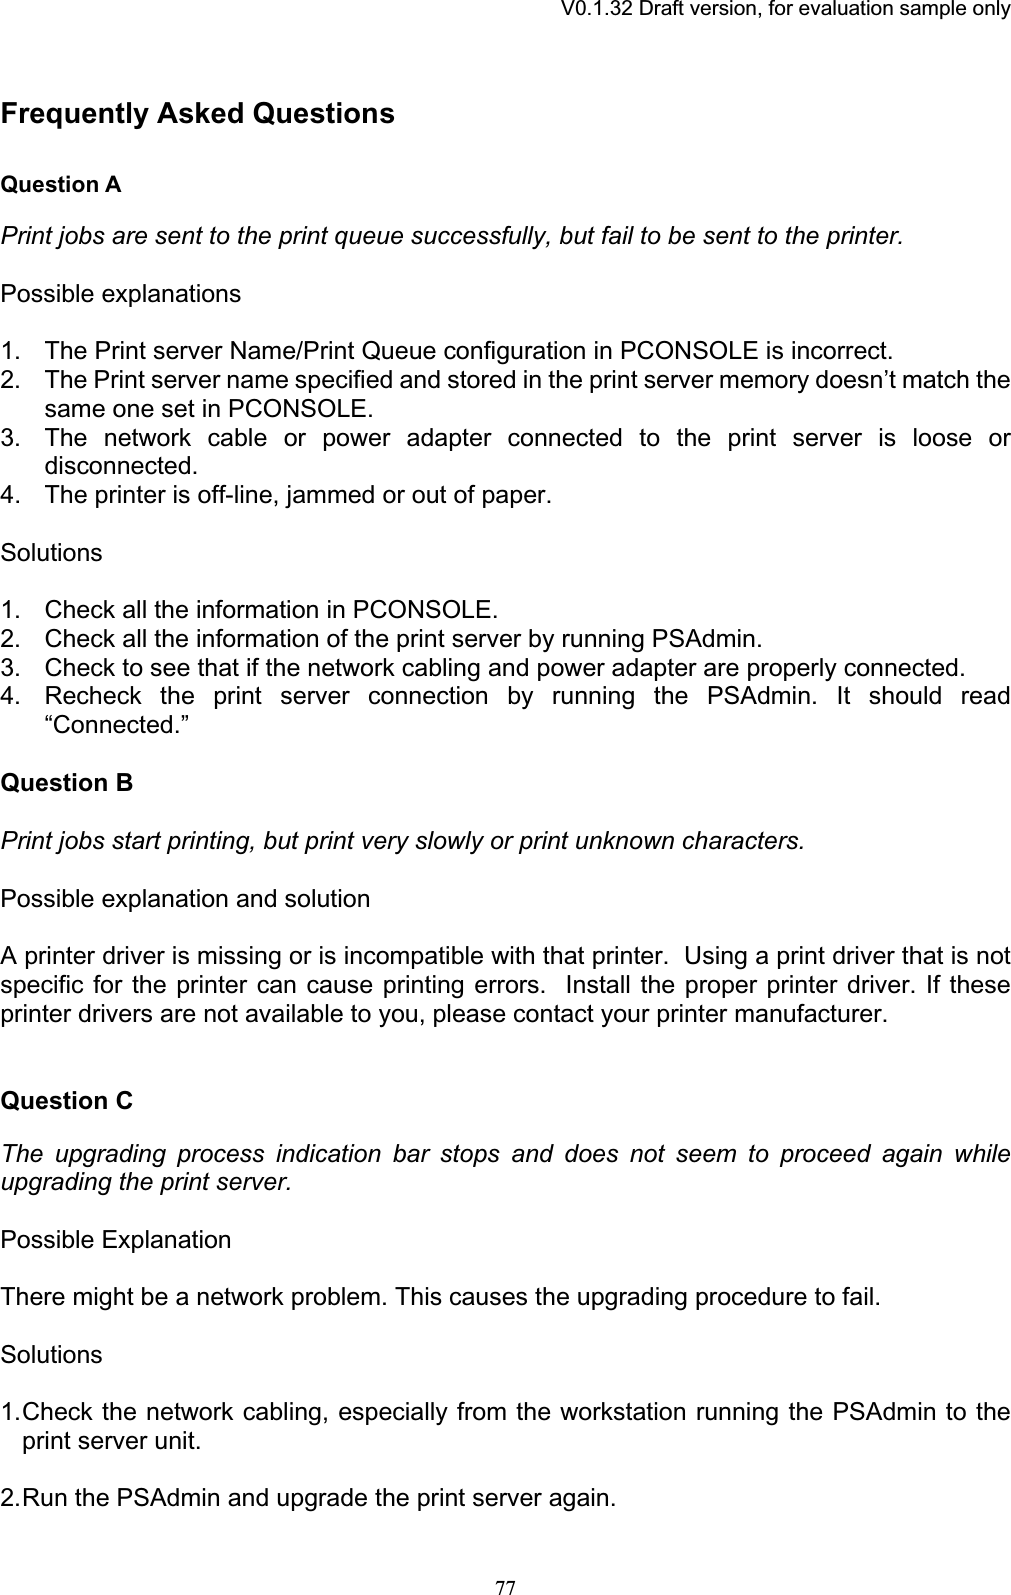 V0.1.32 Draft version, for evaluation sample onlyFrequently Asked Questions Question A Print jobs are sent to the print queue successfully, but fail to be sent to the printer.Possible explanations 1. The Print server Name/Print Queue configuration in PCONSOLE is incorrect. 2. The Print server name specified and stored in the print server memory doesn’t match the same one set in PCONSOLE. 3. The network cable or power adapter connected to the print server is loose or disconnected.4. The printer is off-line, jammed or out of paper. Solutions1. Check all the information in PCONSOLE. 2. Check all the information of the print server by running PSAdmin. 3. Check to see that if the network cabling and power adapter are properly connected. 4. Recheck the print server connection by running the PSAdmin. It should read “Connected.”Question B Print jobs start printing, but print very slowly or print unknown characters. Possible explanation and solution A printer driver is missing or is incompatible with that printer. Using a print driver that is not specific for the printer can cause printing errors.  Install the proper printer driver. If these printer drivers are not available to you, please contact your printer manufacturer. Question CThe upgrading process indication bar stops and does not seem to proceed again while upgrading the print server. Possible Explanation There might be a network problem. This causes the upgrading procedure to fail. Solutions1.Check the network cabling, especially from the workstation running the PSAdmin to the print server unit. 2.Run the PSAdmin and upgrade the print server again. 77